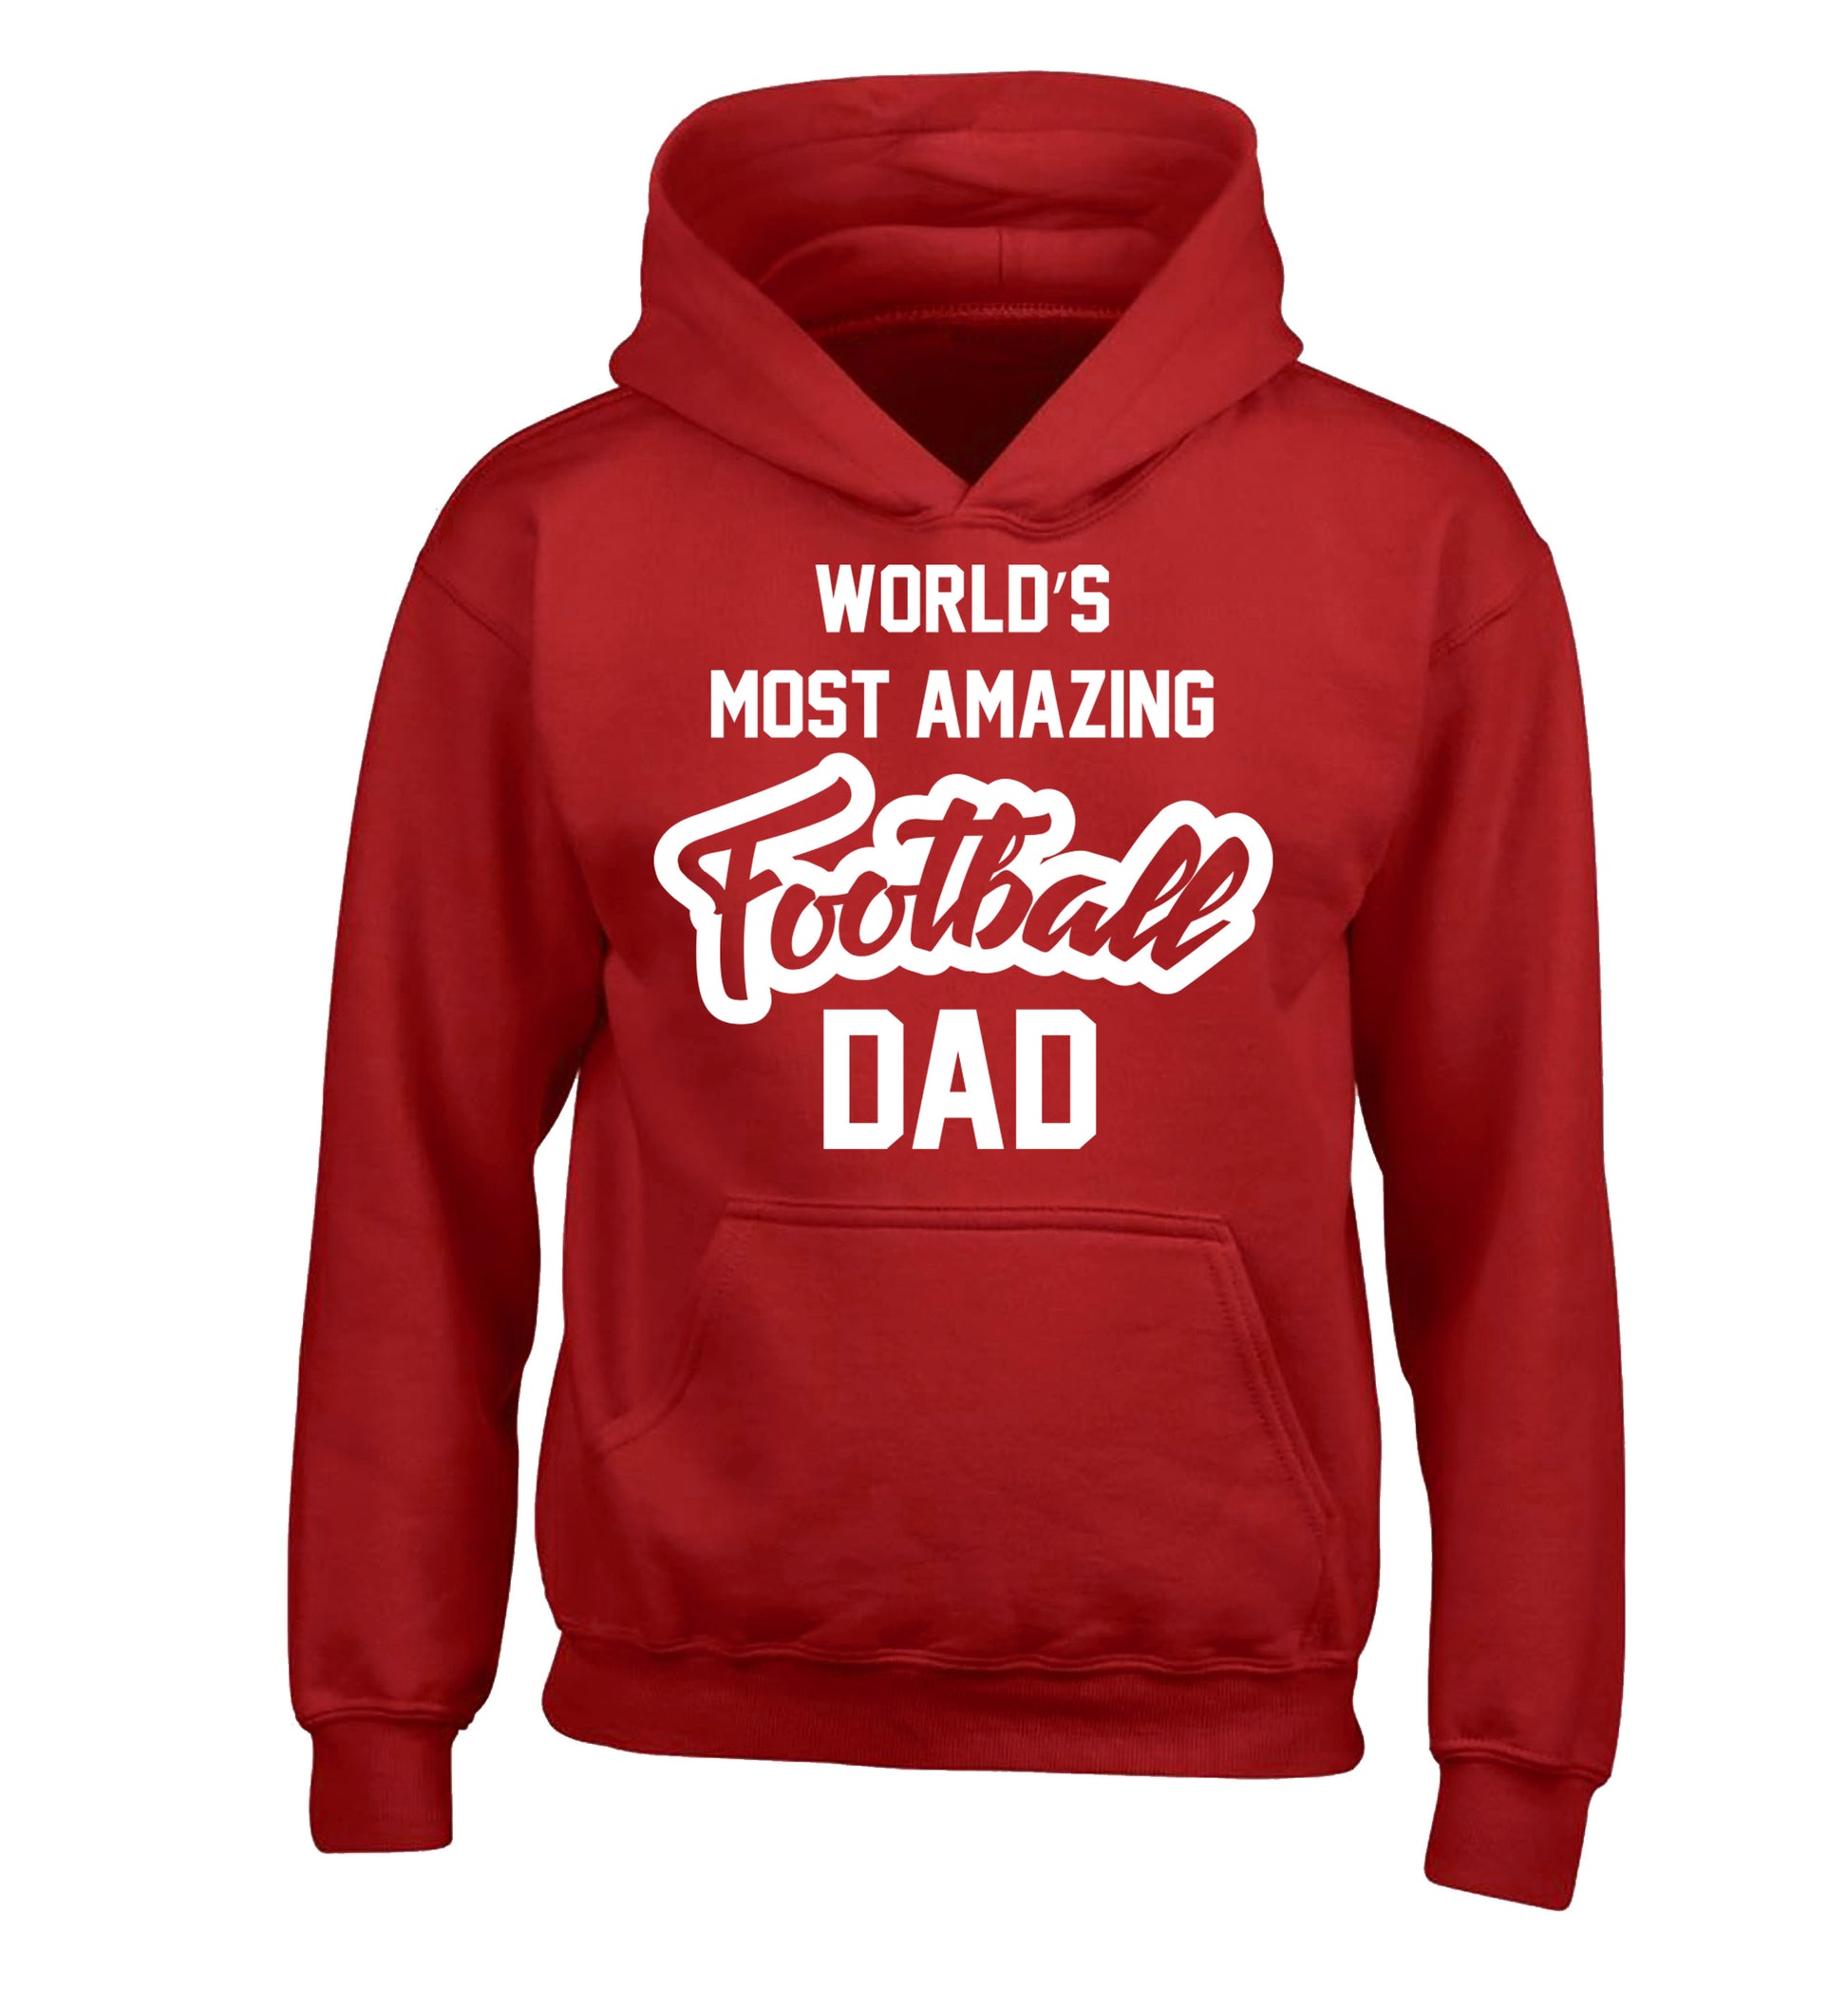 Worlds most amazing football dad children's red hoodie 12-14 Years